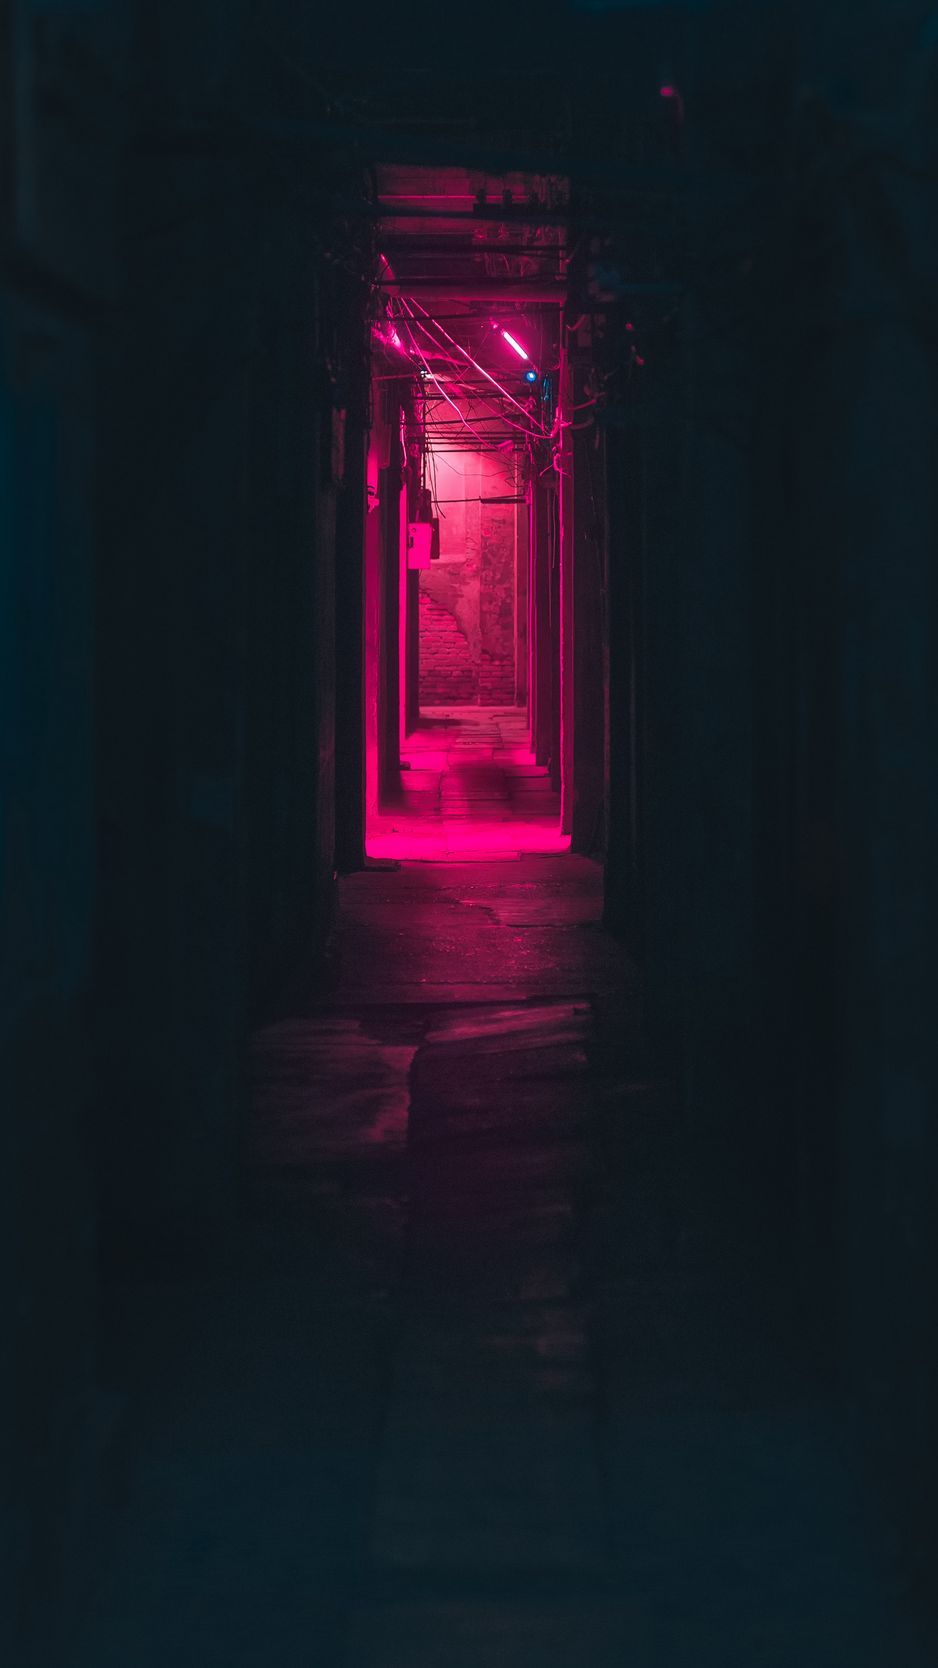 A dark alley with pink lighting - Neon pink